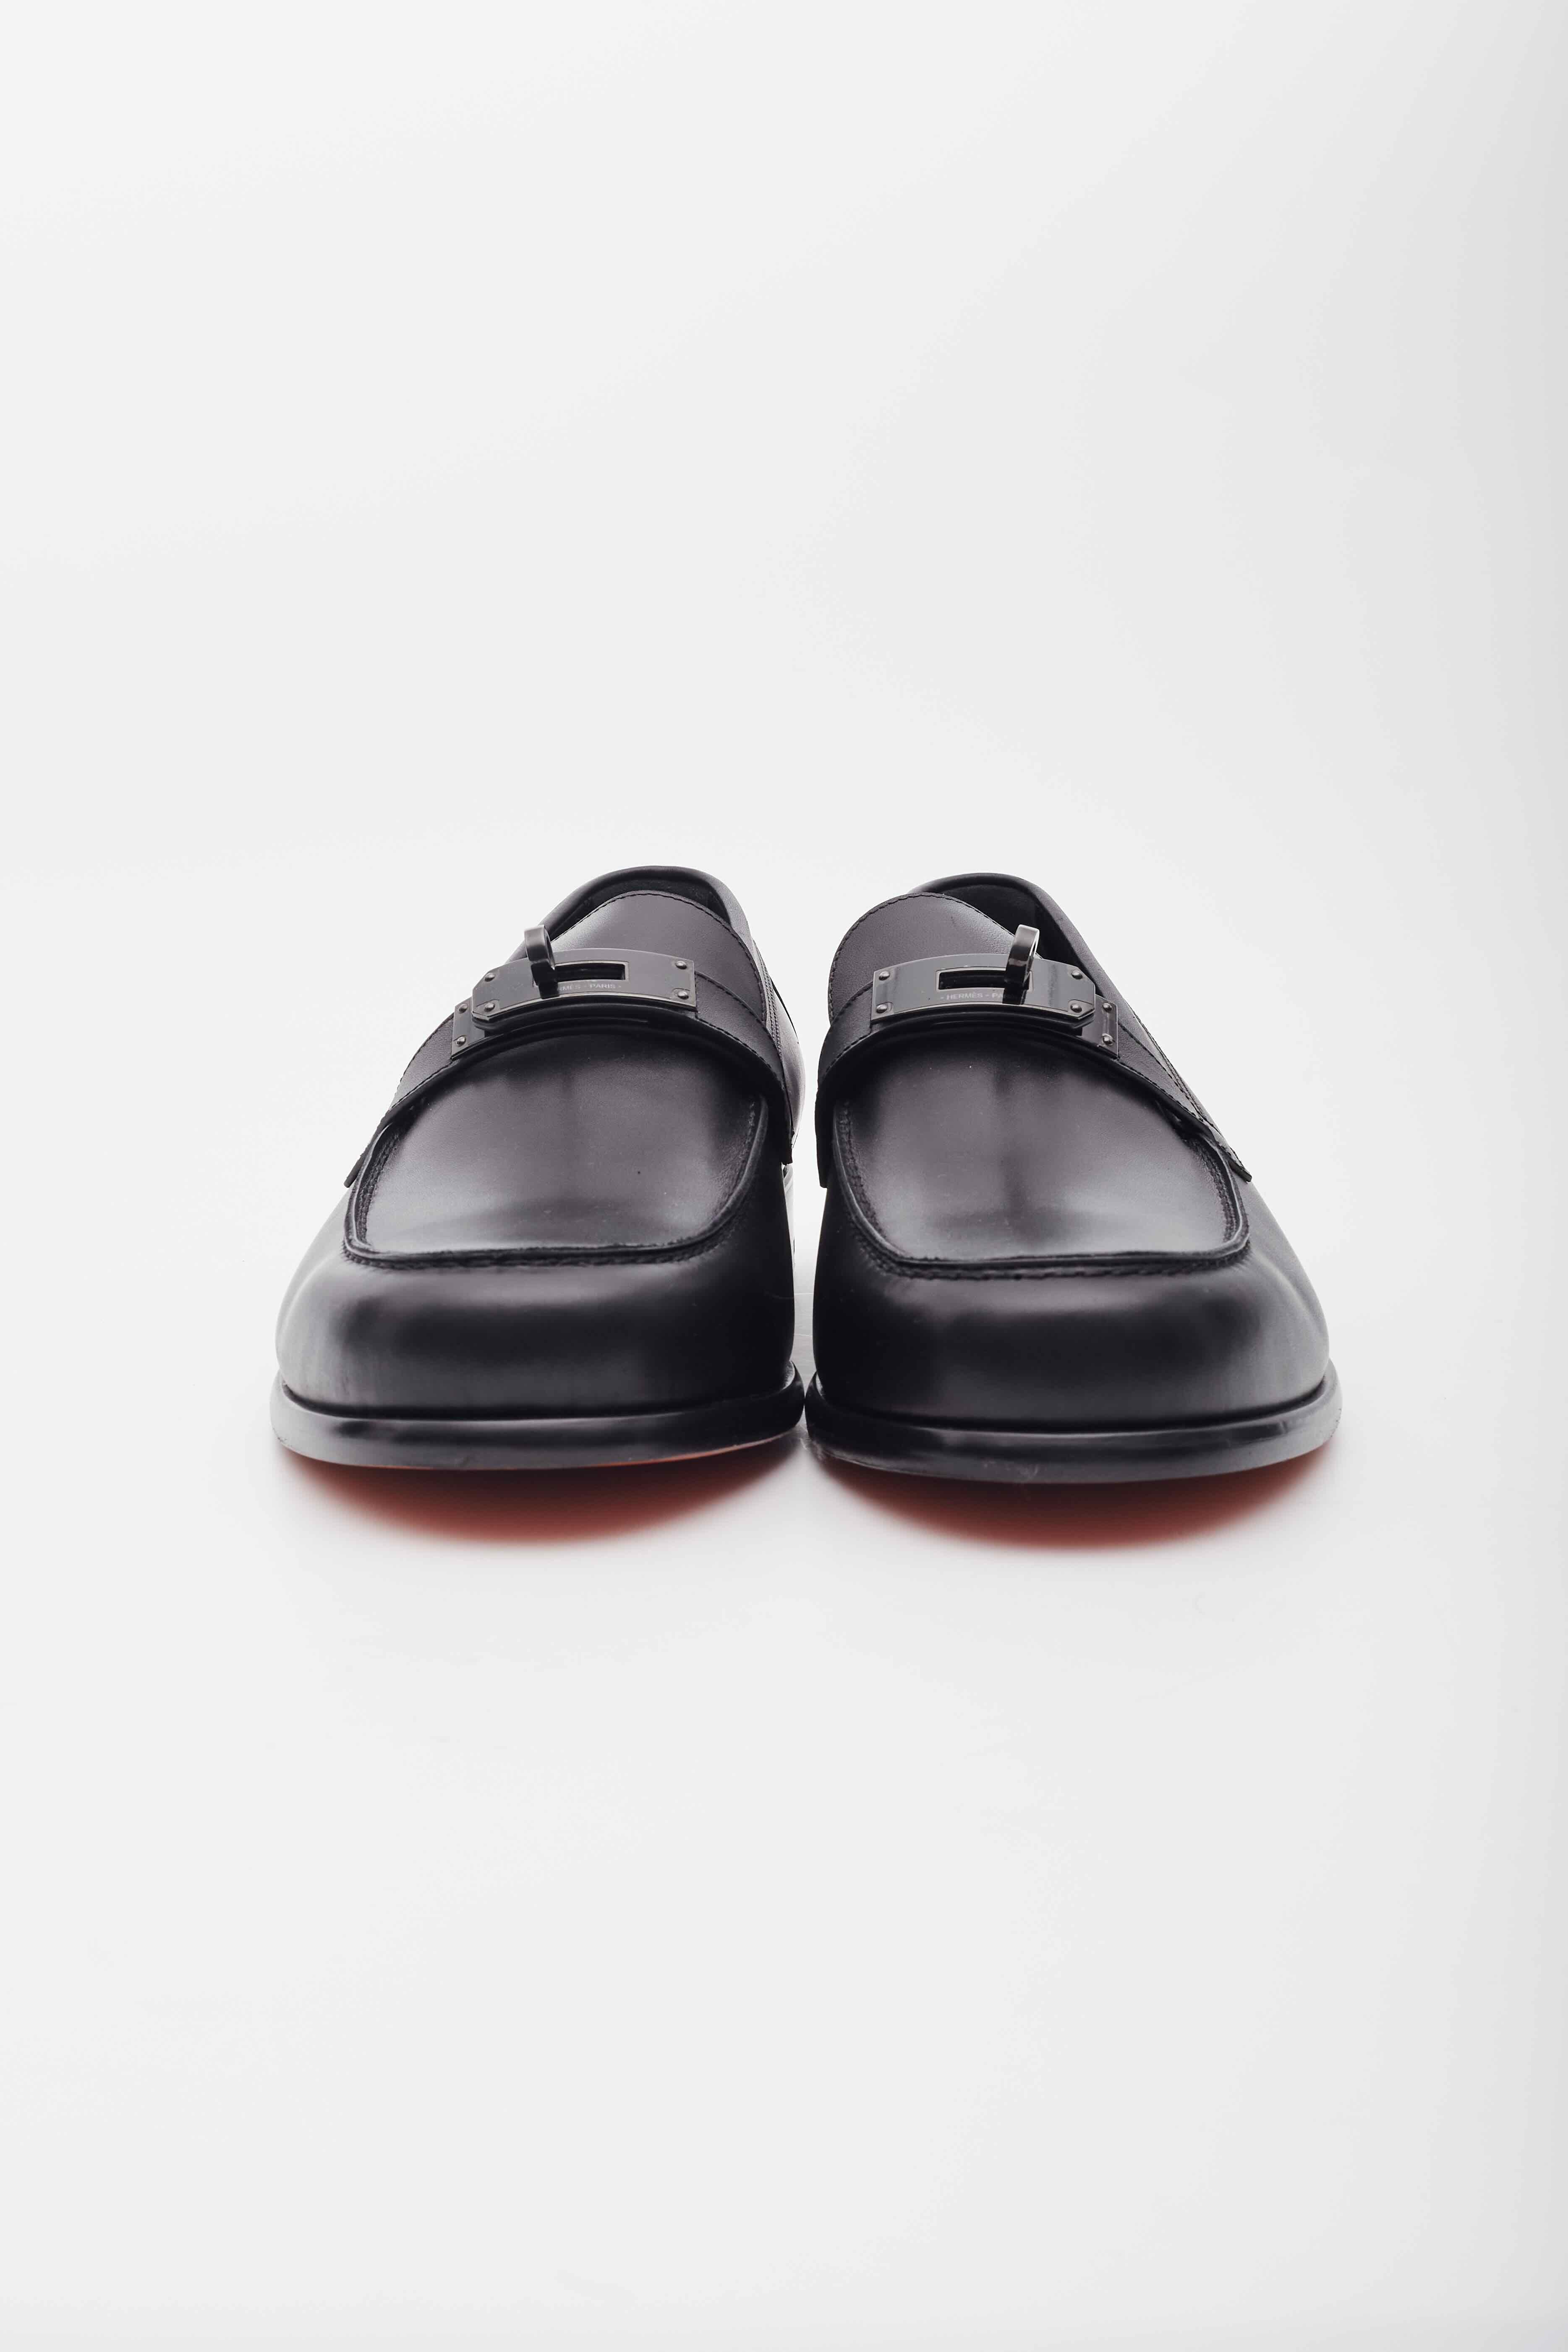 Hermes Calfskin Black Plated Kelly Buckle Destin Loafers (EU 44) In Excellent Condition For Sale In Montreal, Quebec